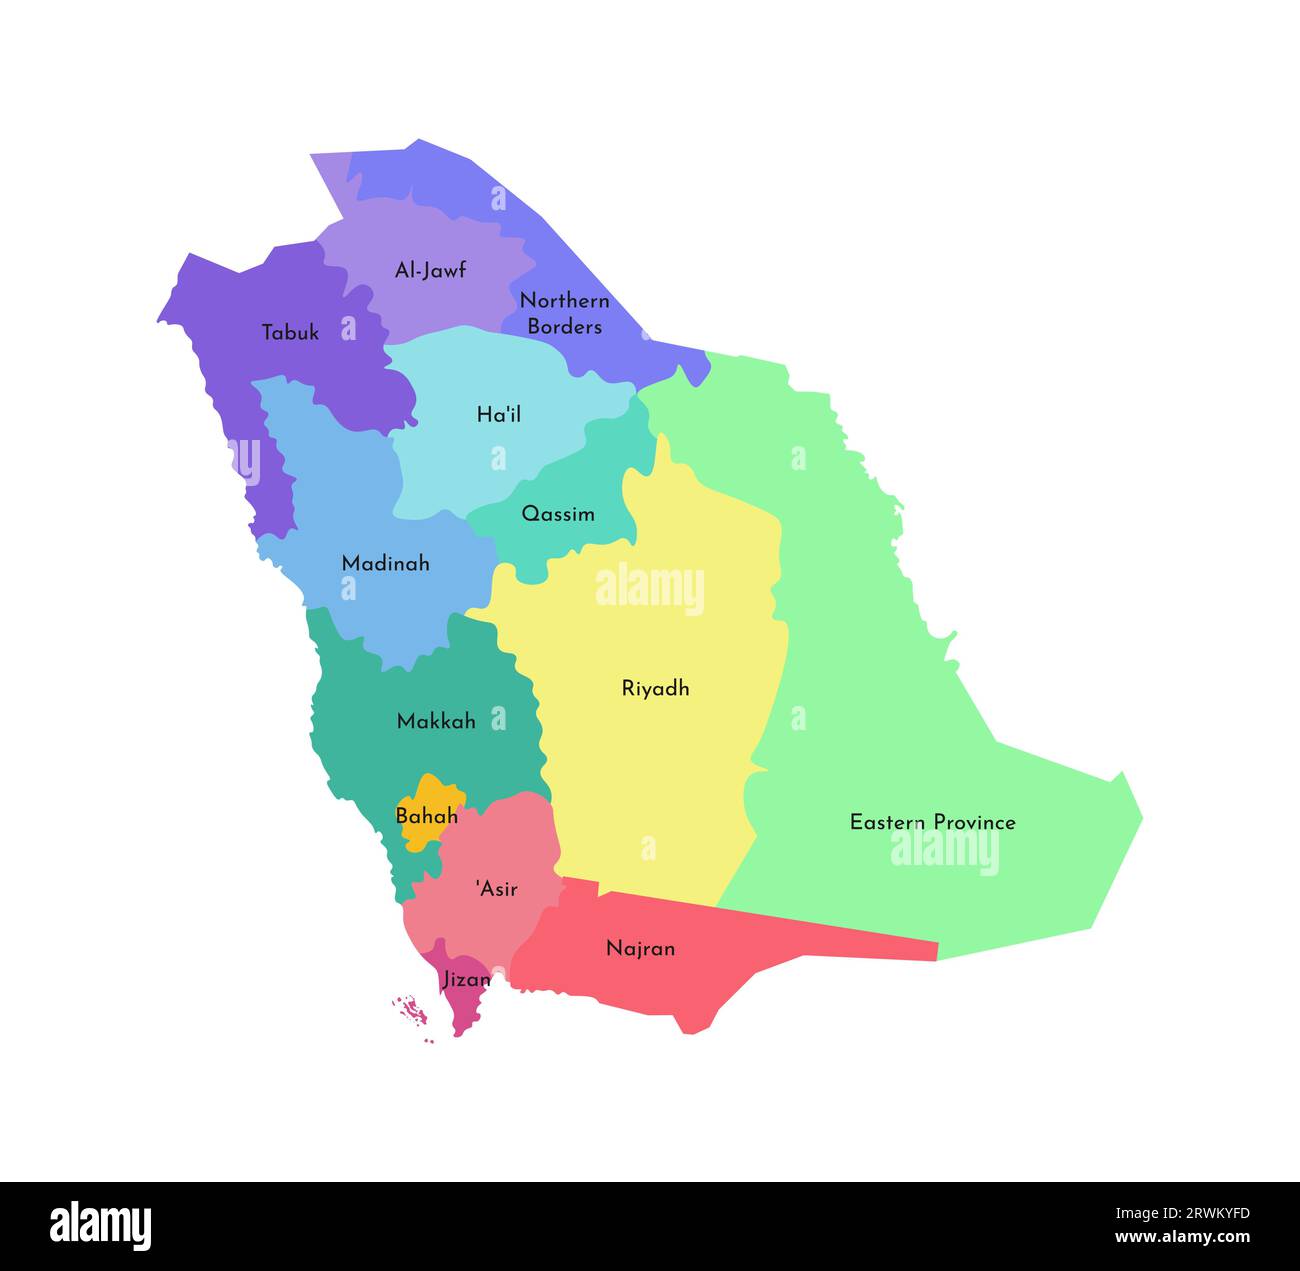 Vector isolated illustration of simplified administrative map of Saudi Arabia. Borders and names of the regions. Multi colored silhouettes. Stock Vector